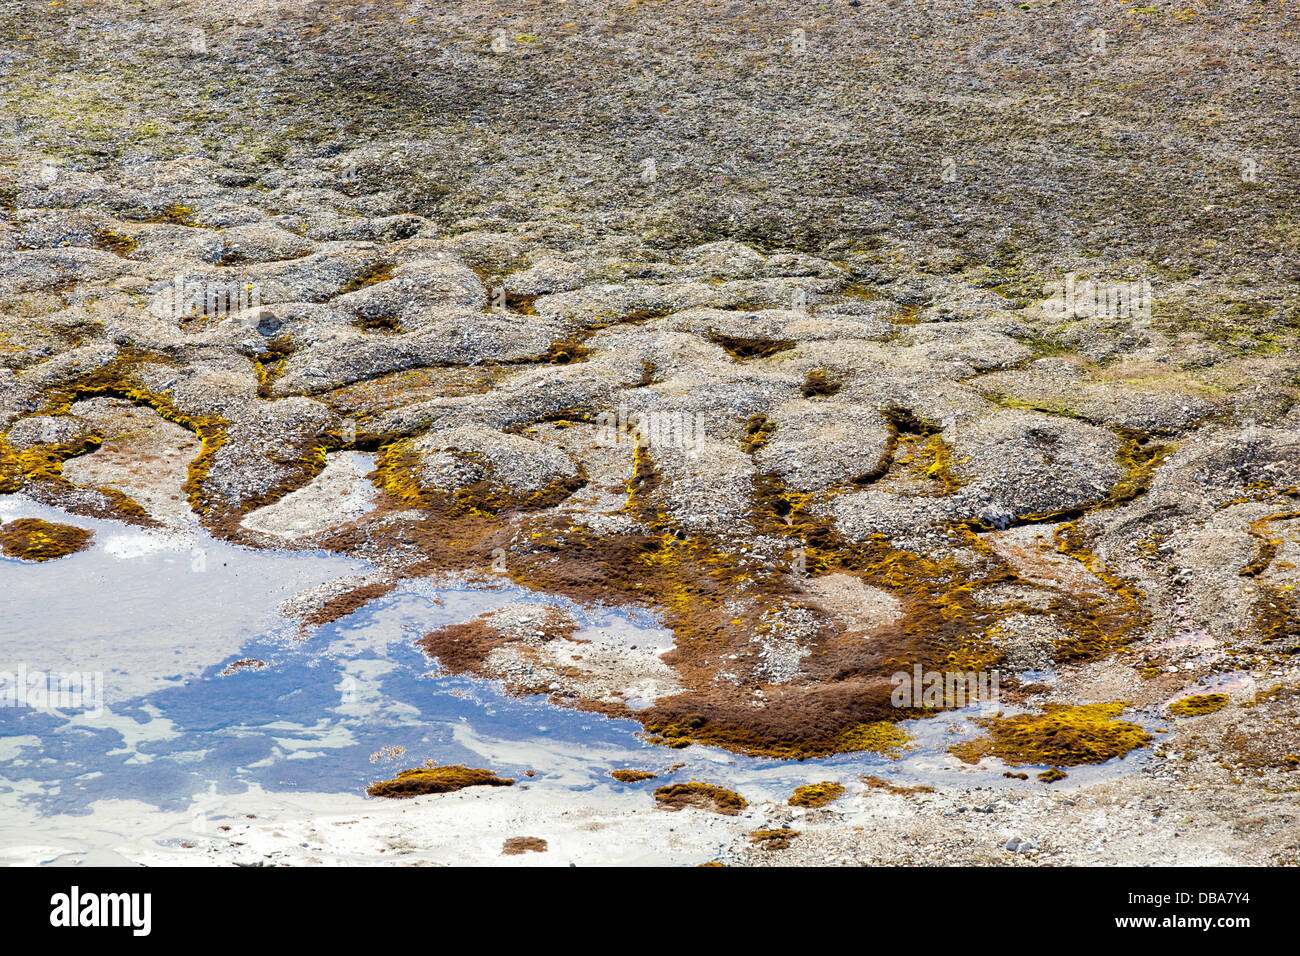 Patterned ground and stone circles formed above permafrost in the high Arctic on Spitsbergen, Svalbard Stock Photo